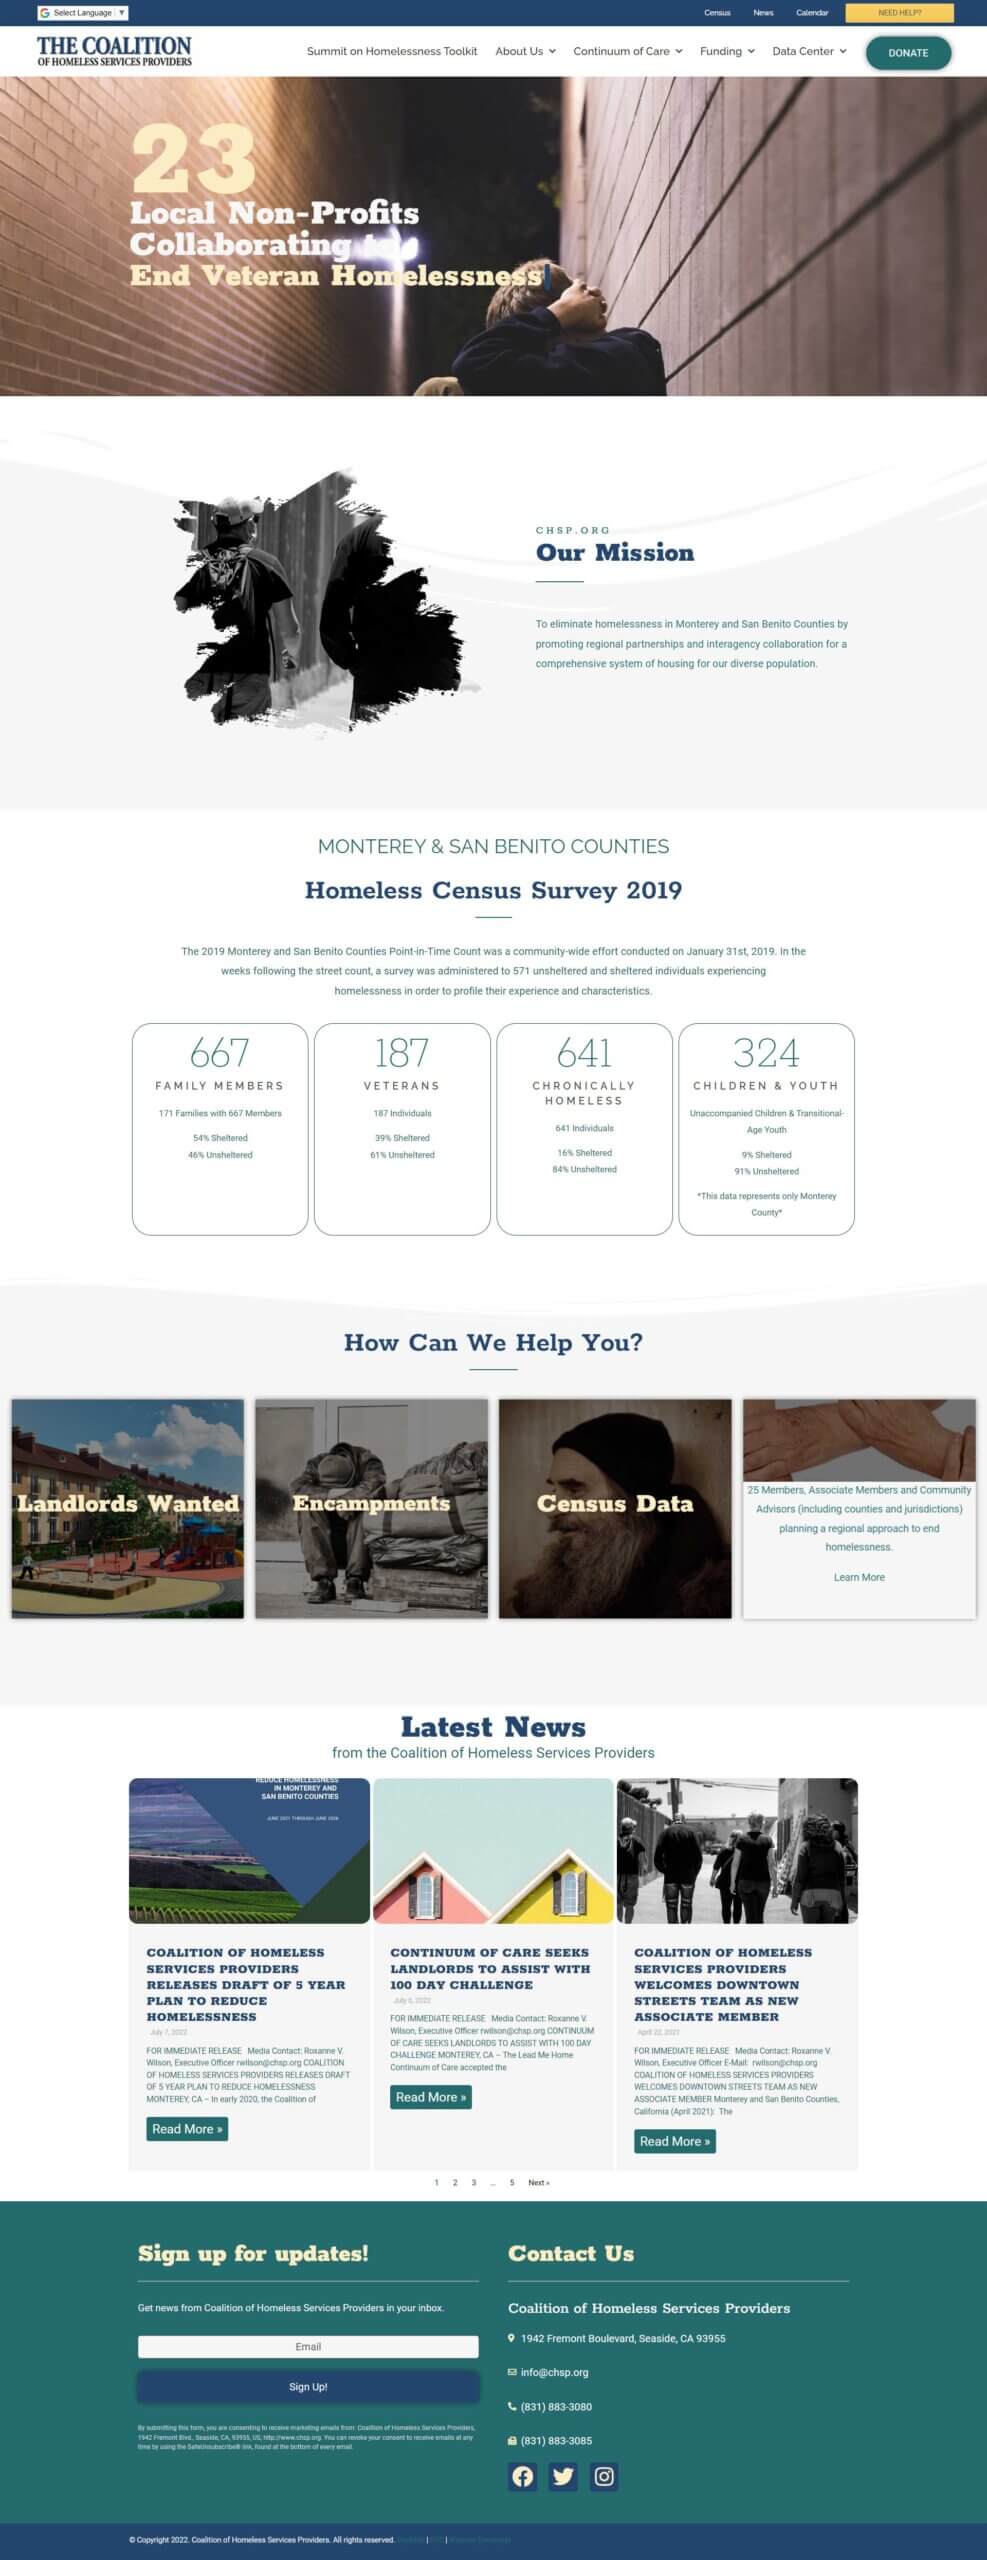 coalition of homeless service providers website redesign